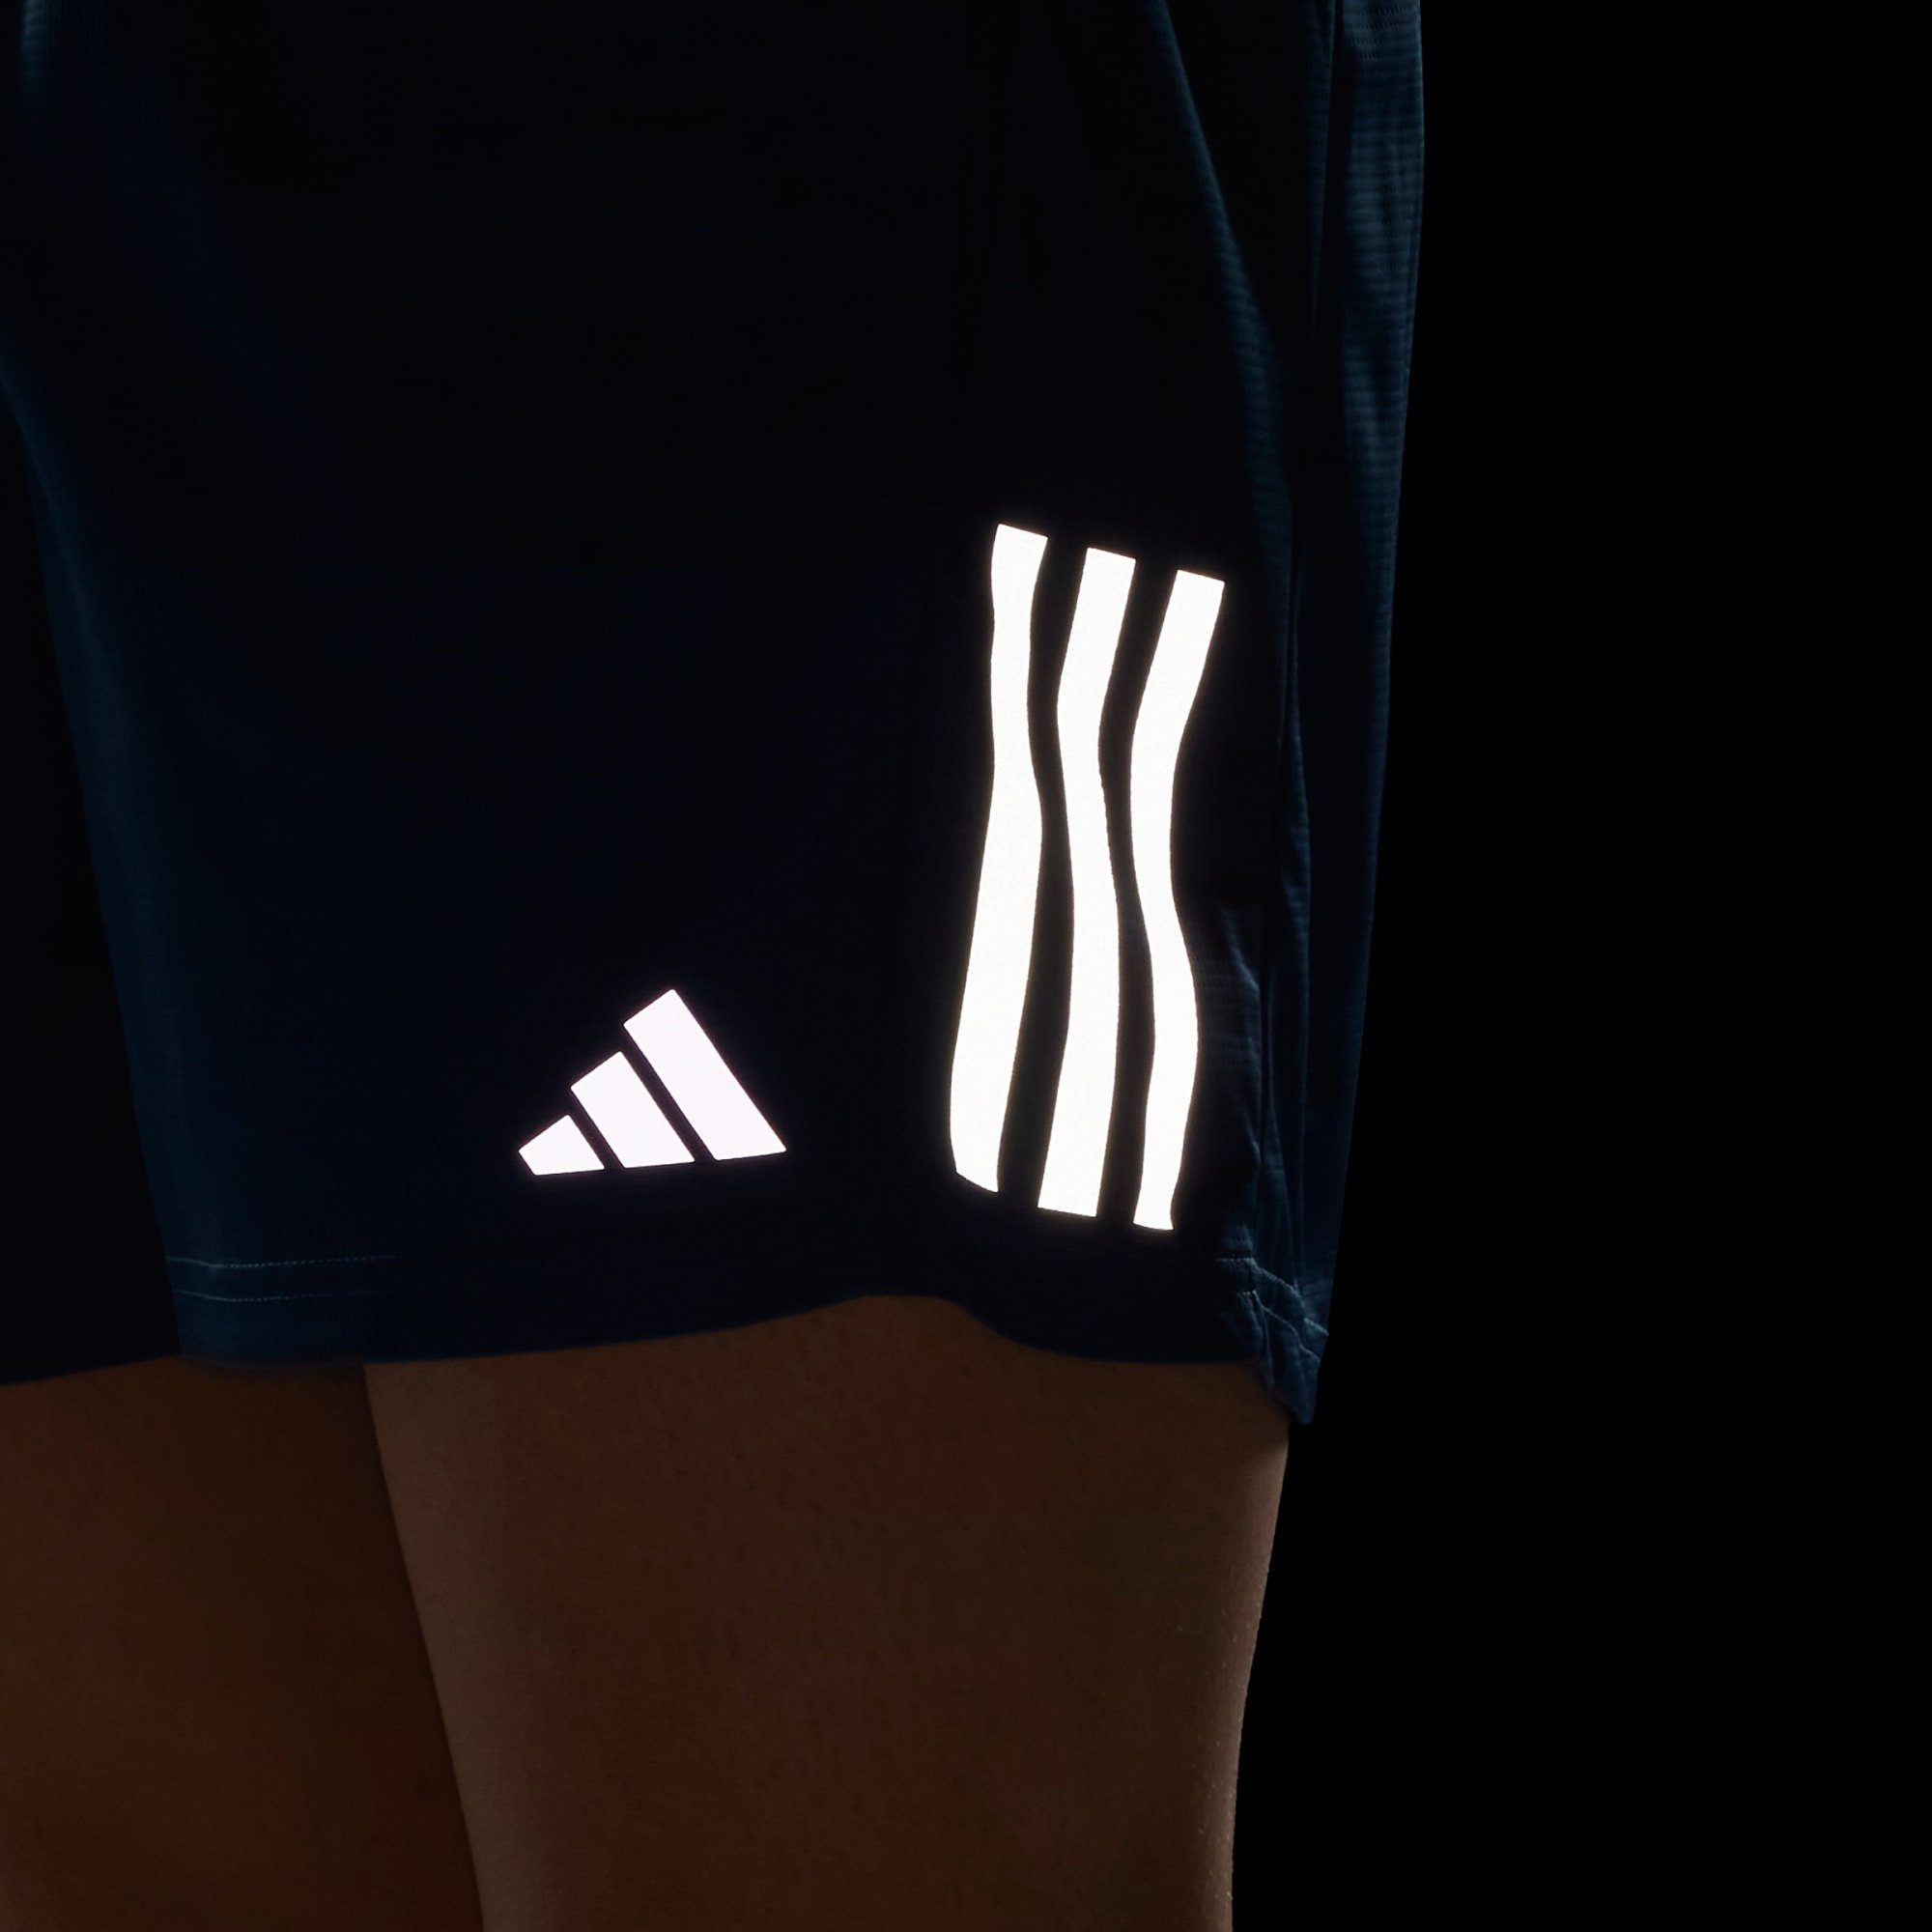 adidas Performance Laufshorts OWN CARBON THE RUN MEASURED SHORTS